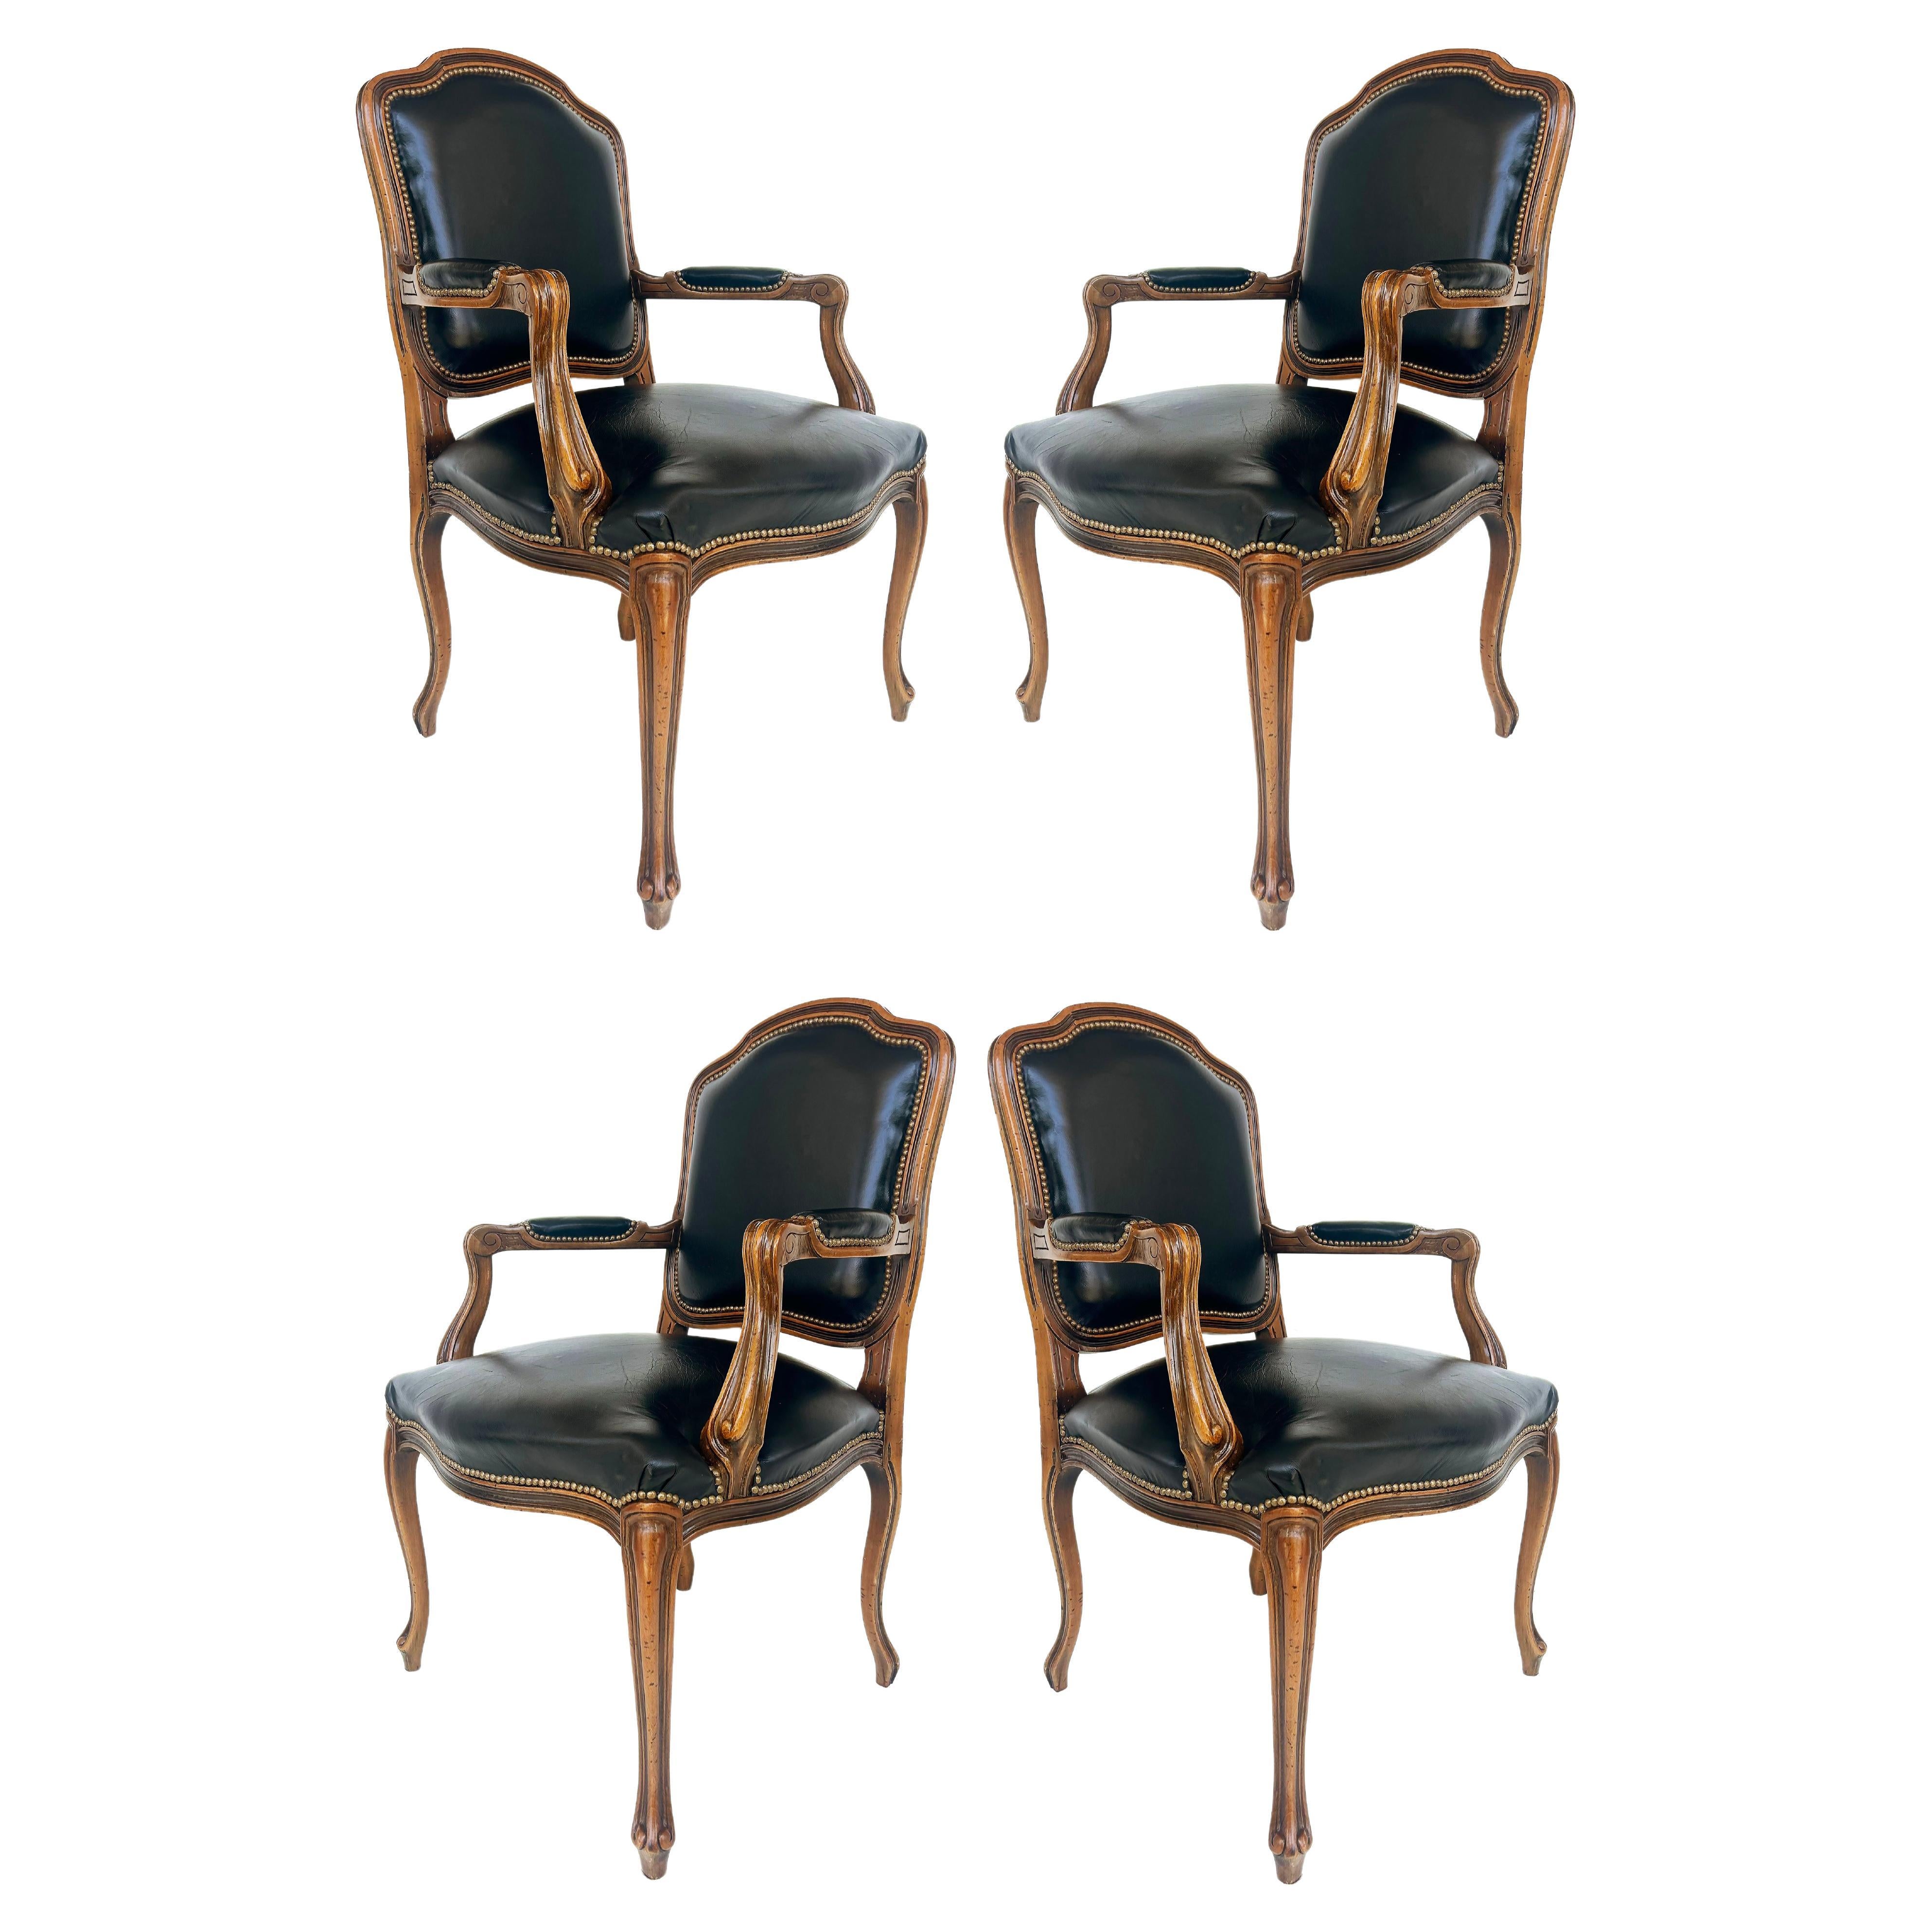 Vintage Italian Chateau D'Ax Leather Armchairs with Brass Nailhead Details, Pair